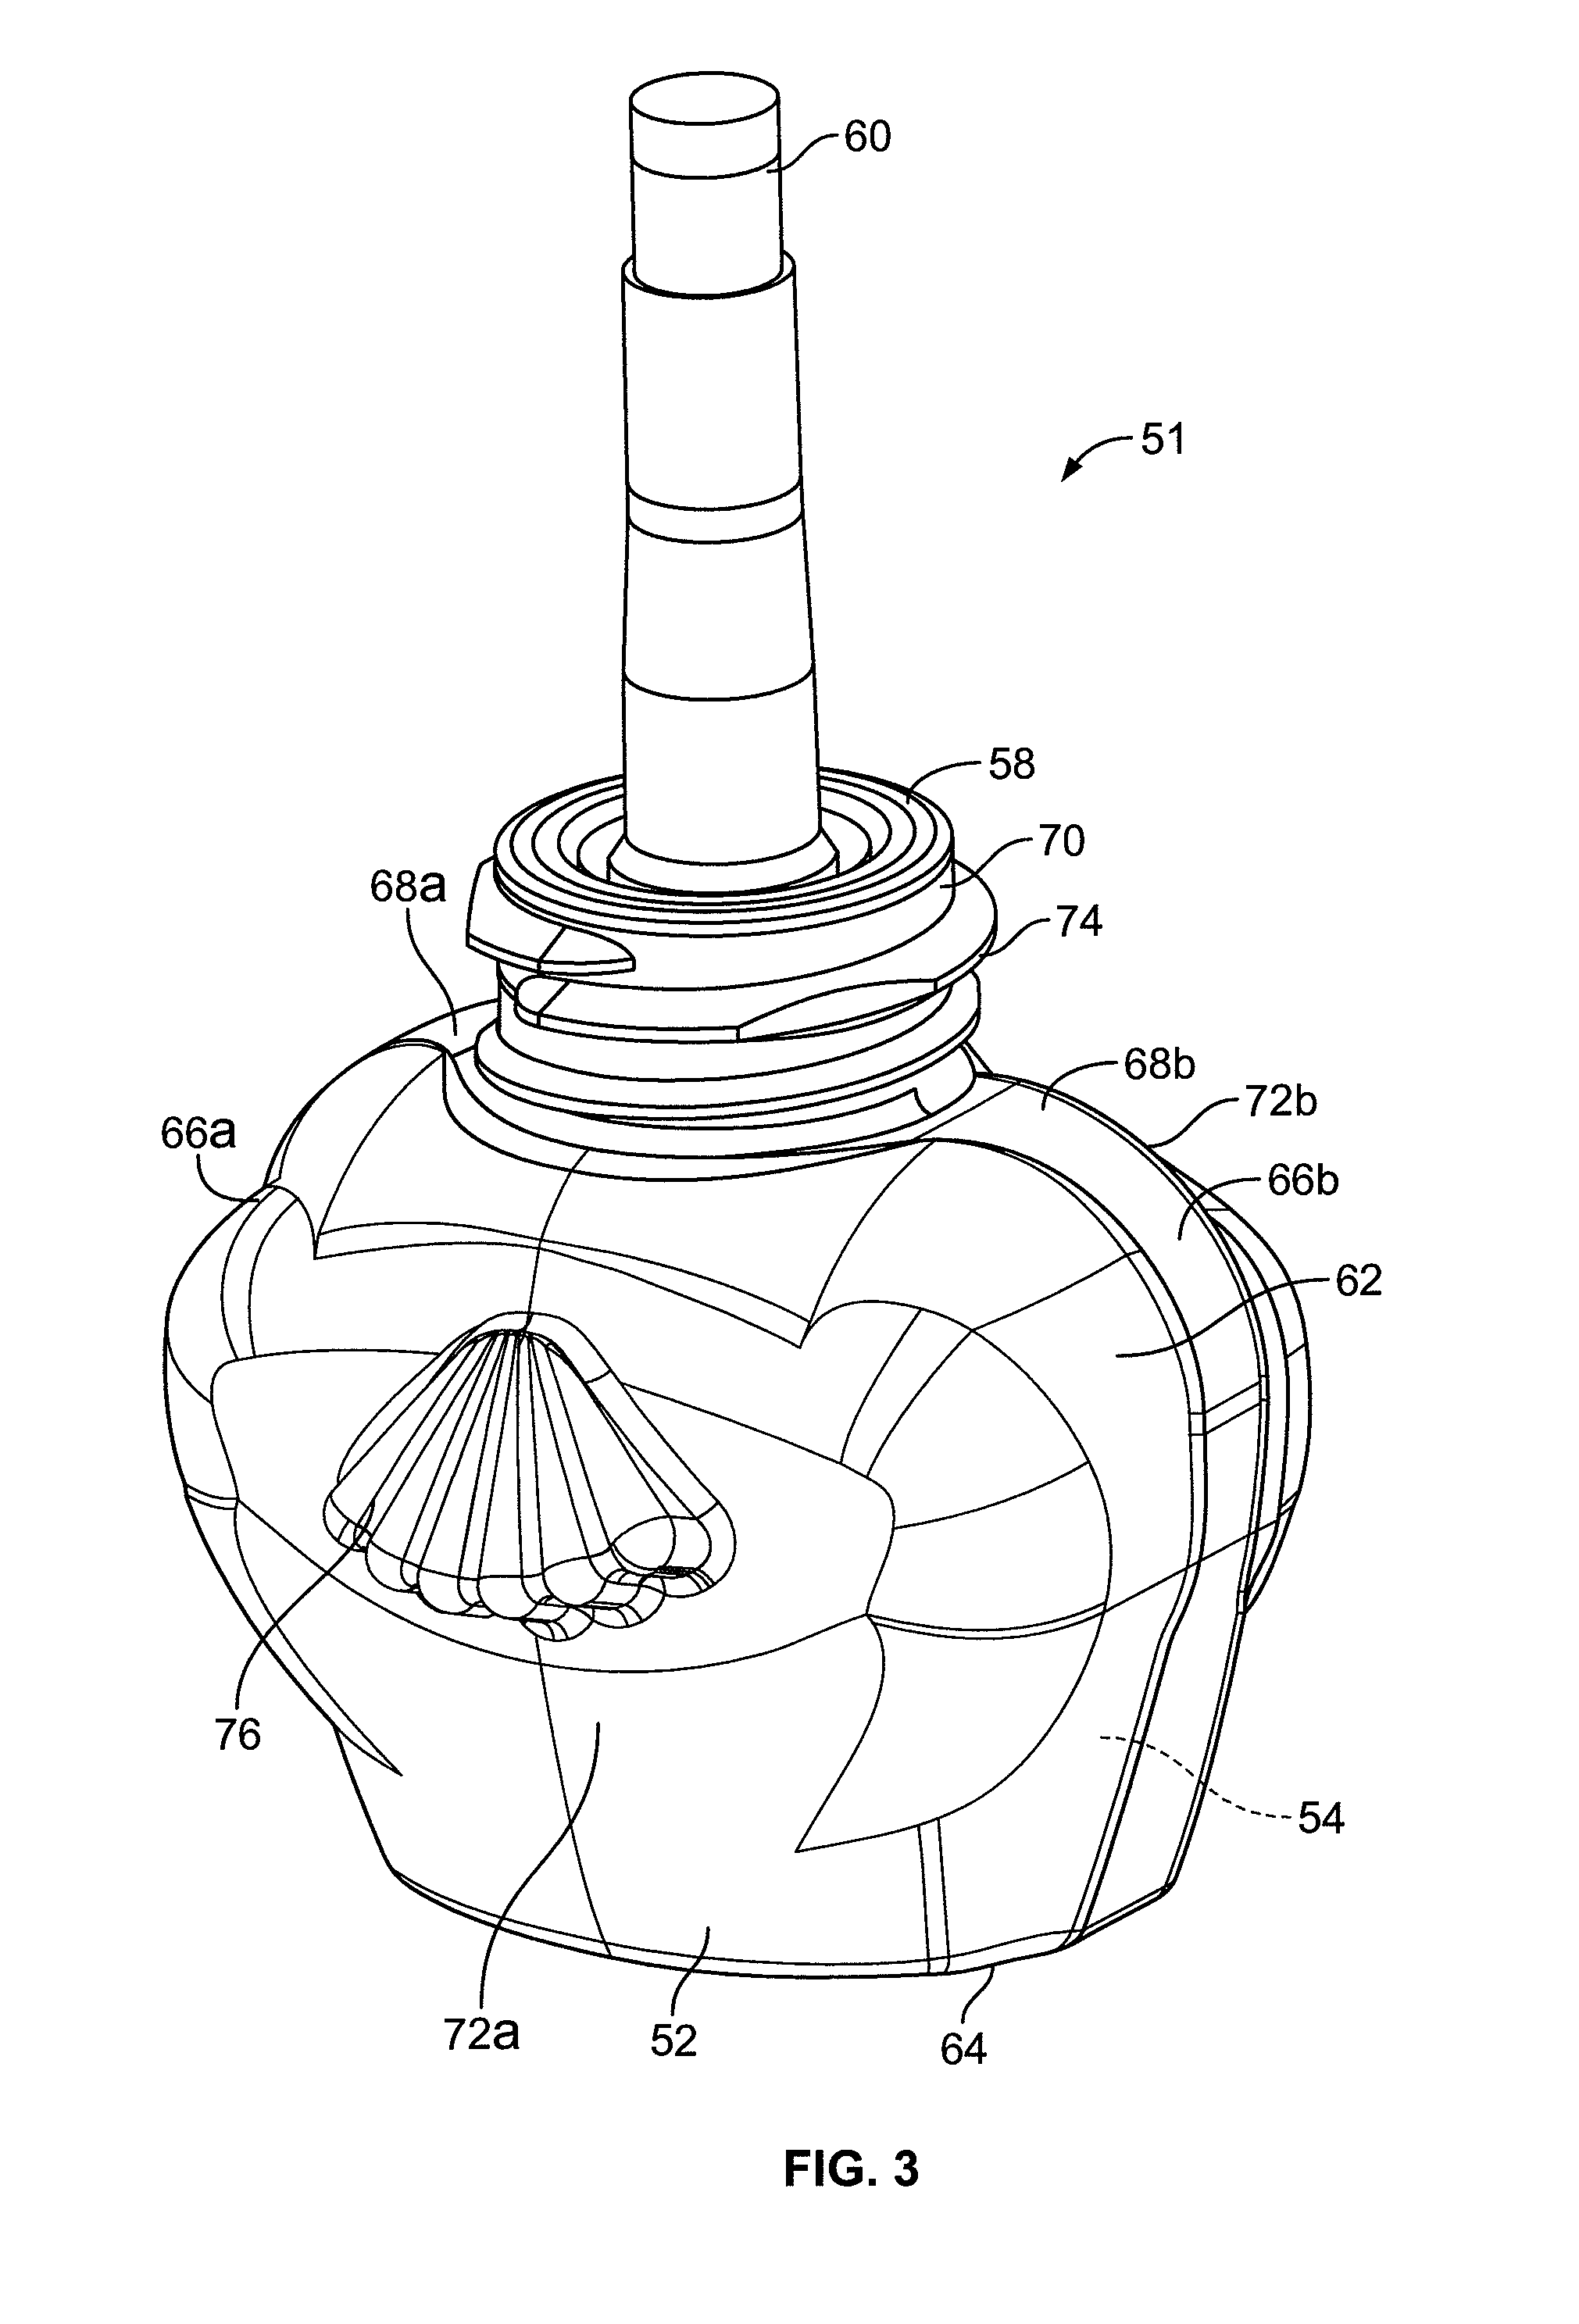 Rotatable plug assembly and housing for a volatile material dispenser